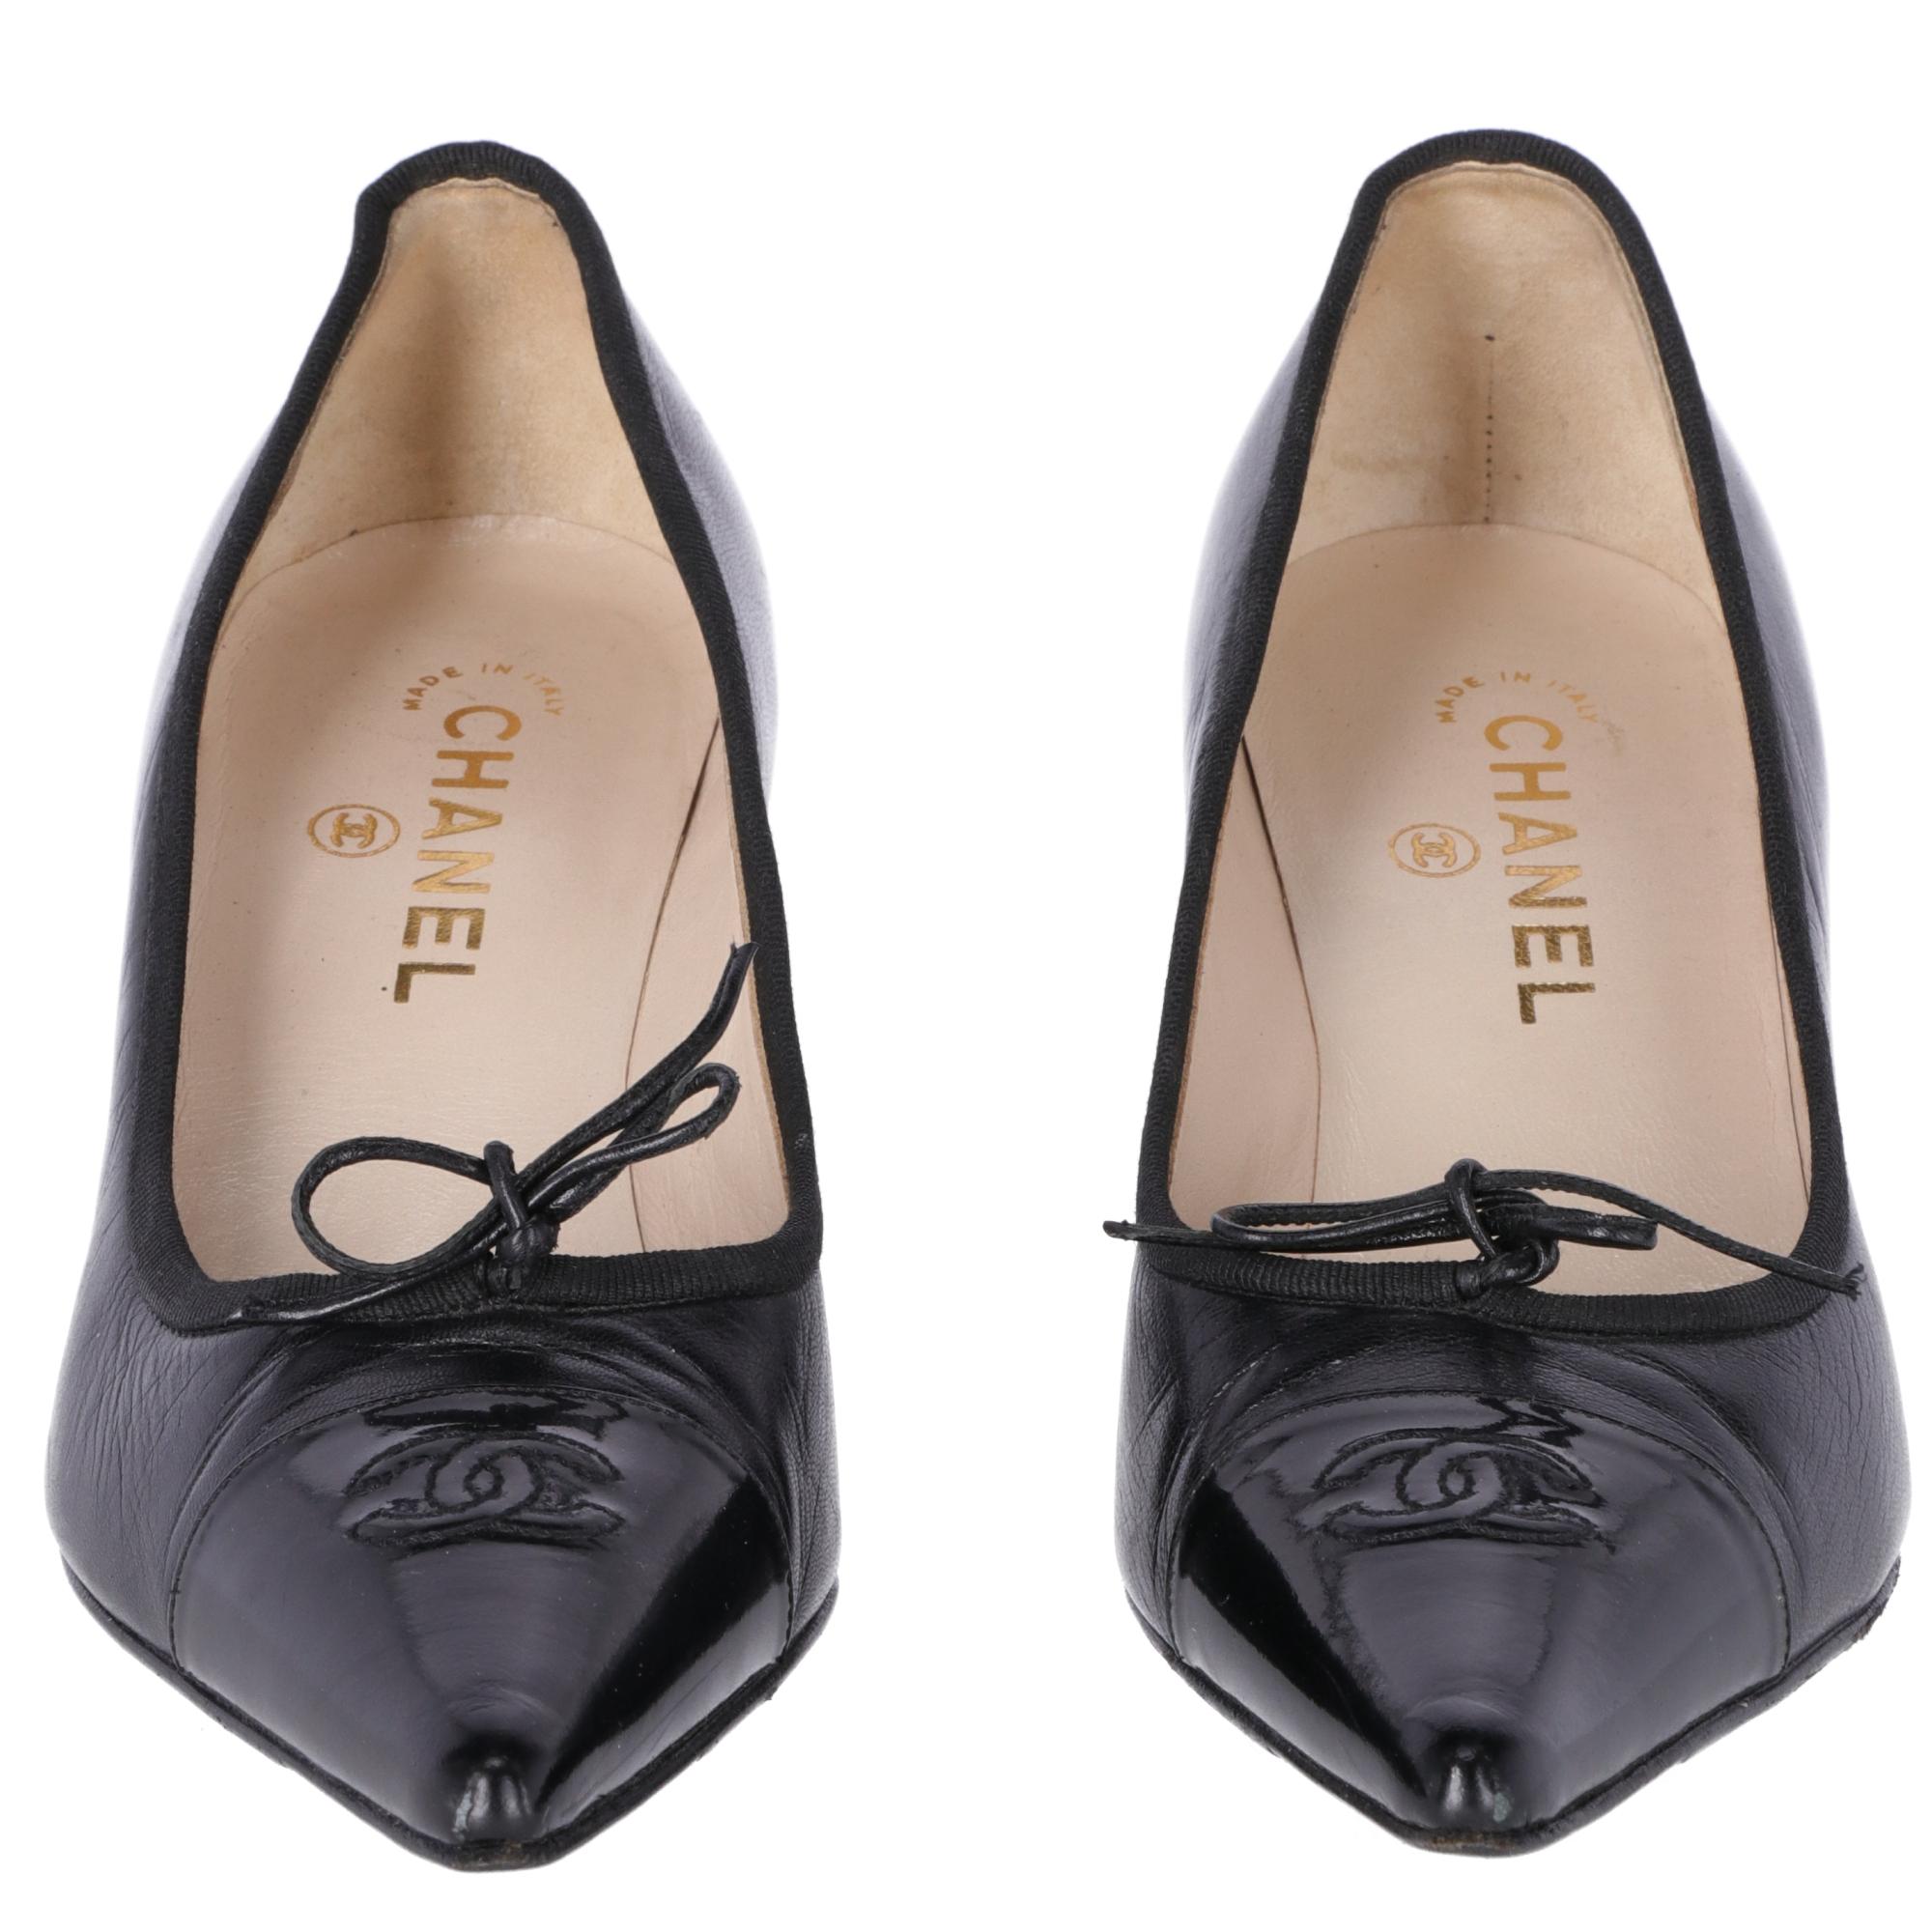 Chanel heeled shoes in black leather, shiny toe with embroidered black logo and leather bow. Lined in ivory leather.

The item is vintage and shows different signs of wear on the leather, as shown in the pictures.

Made in Italy

Years: 1990

Size: